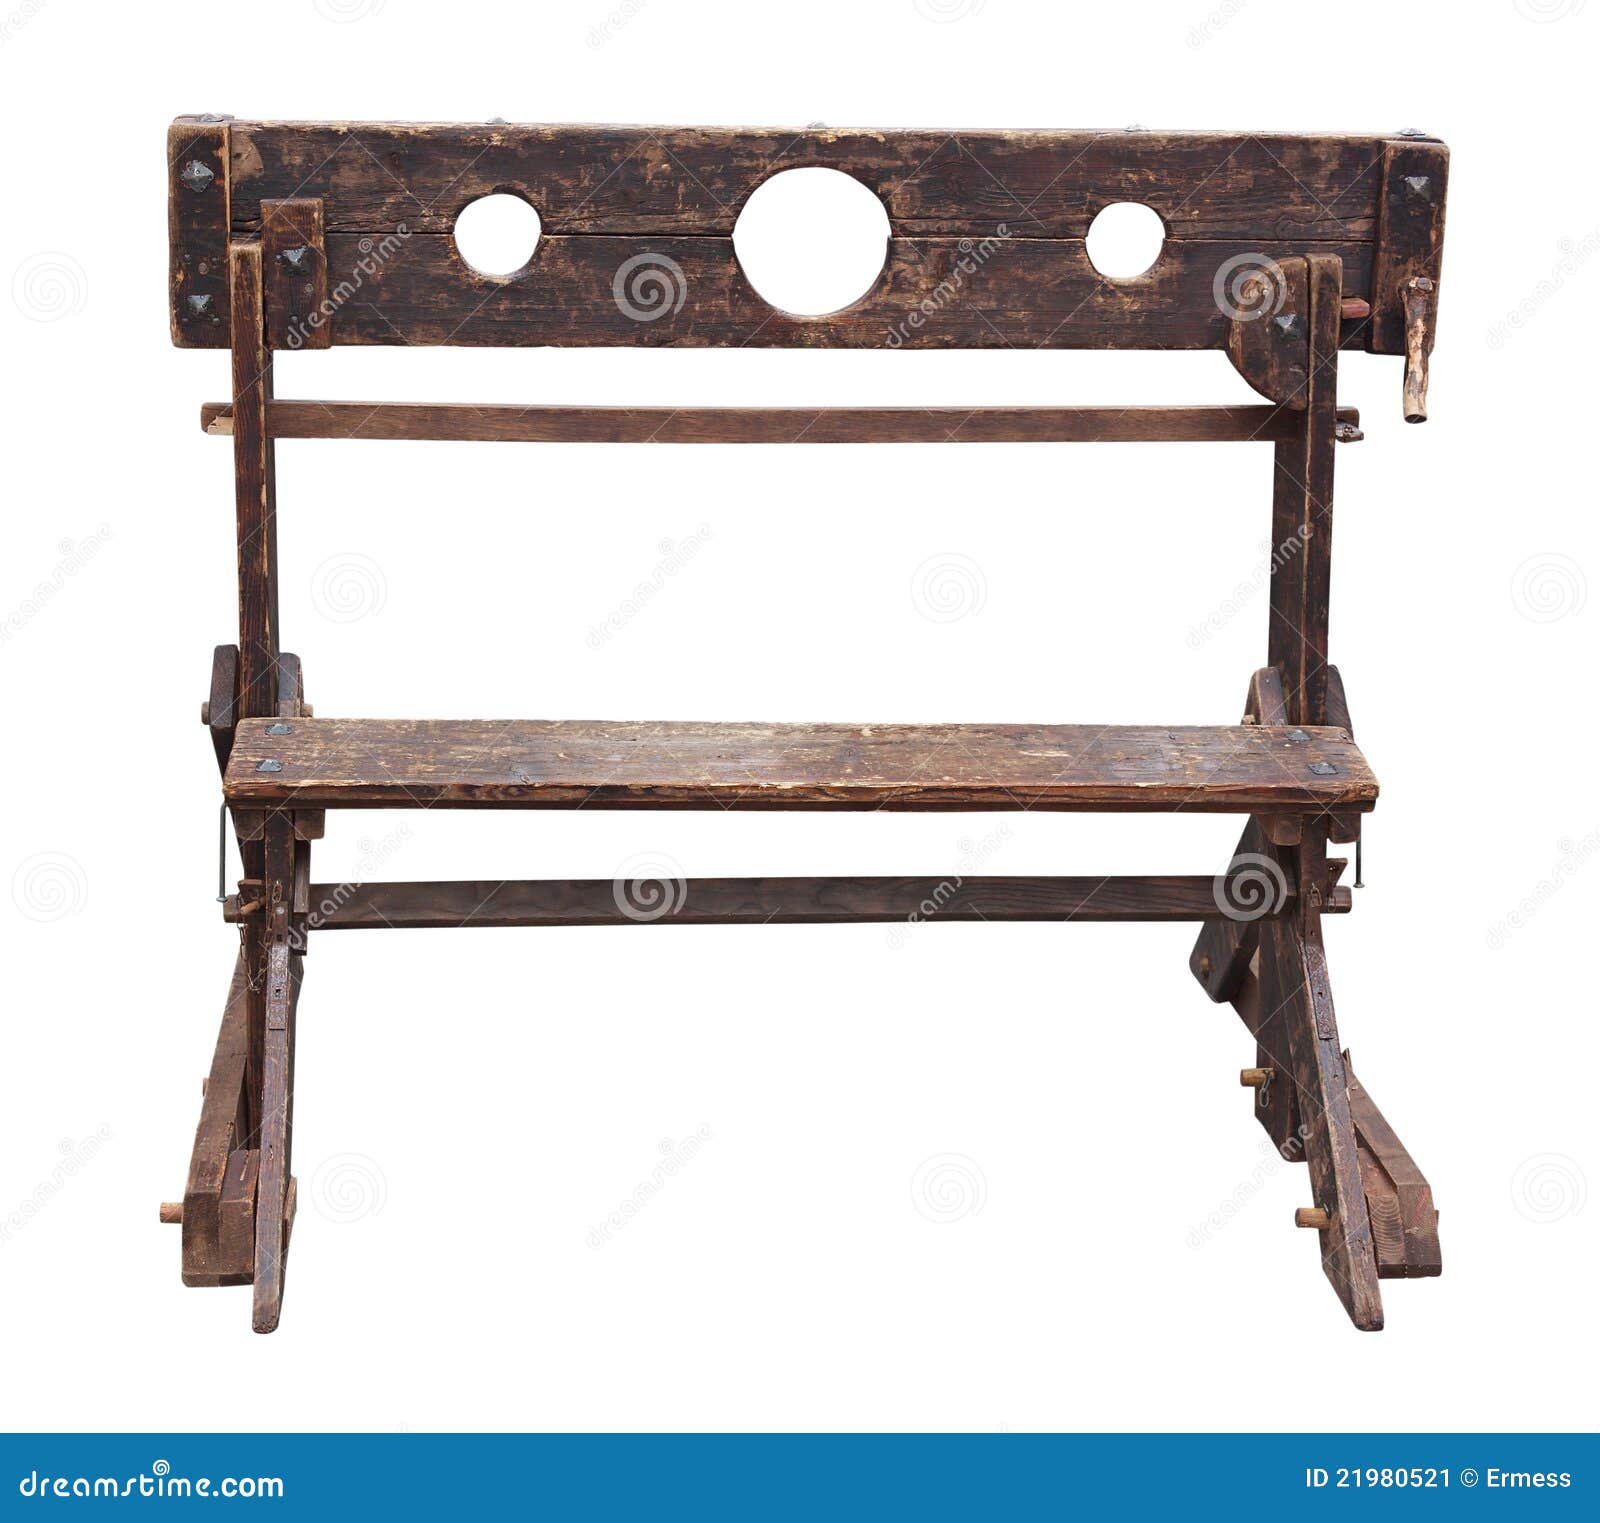 Collection 100+ Images what is a pillory in the middle ages Updated